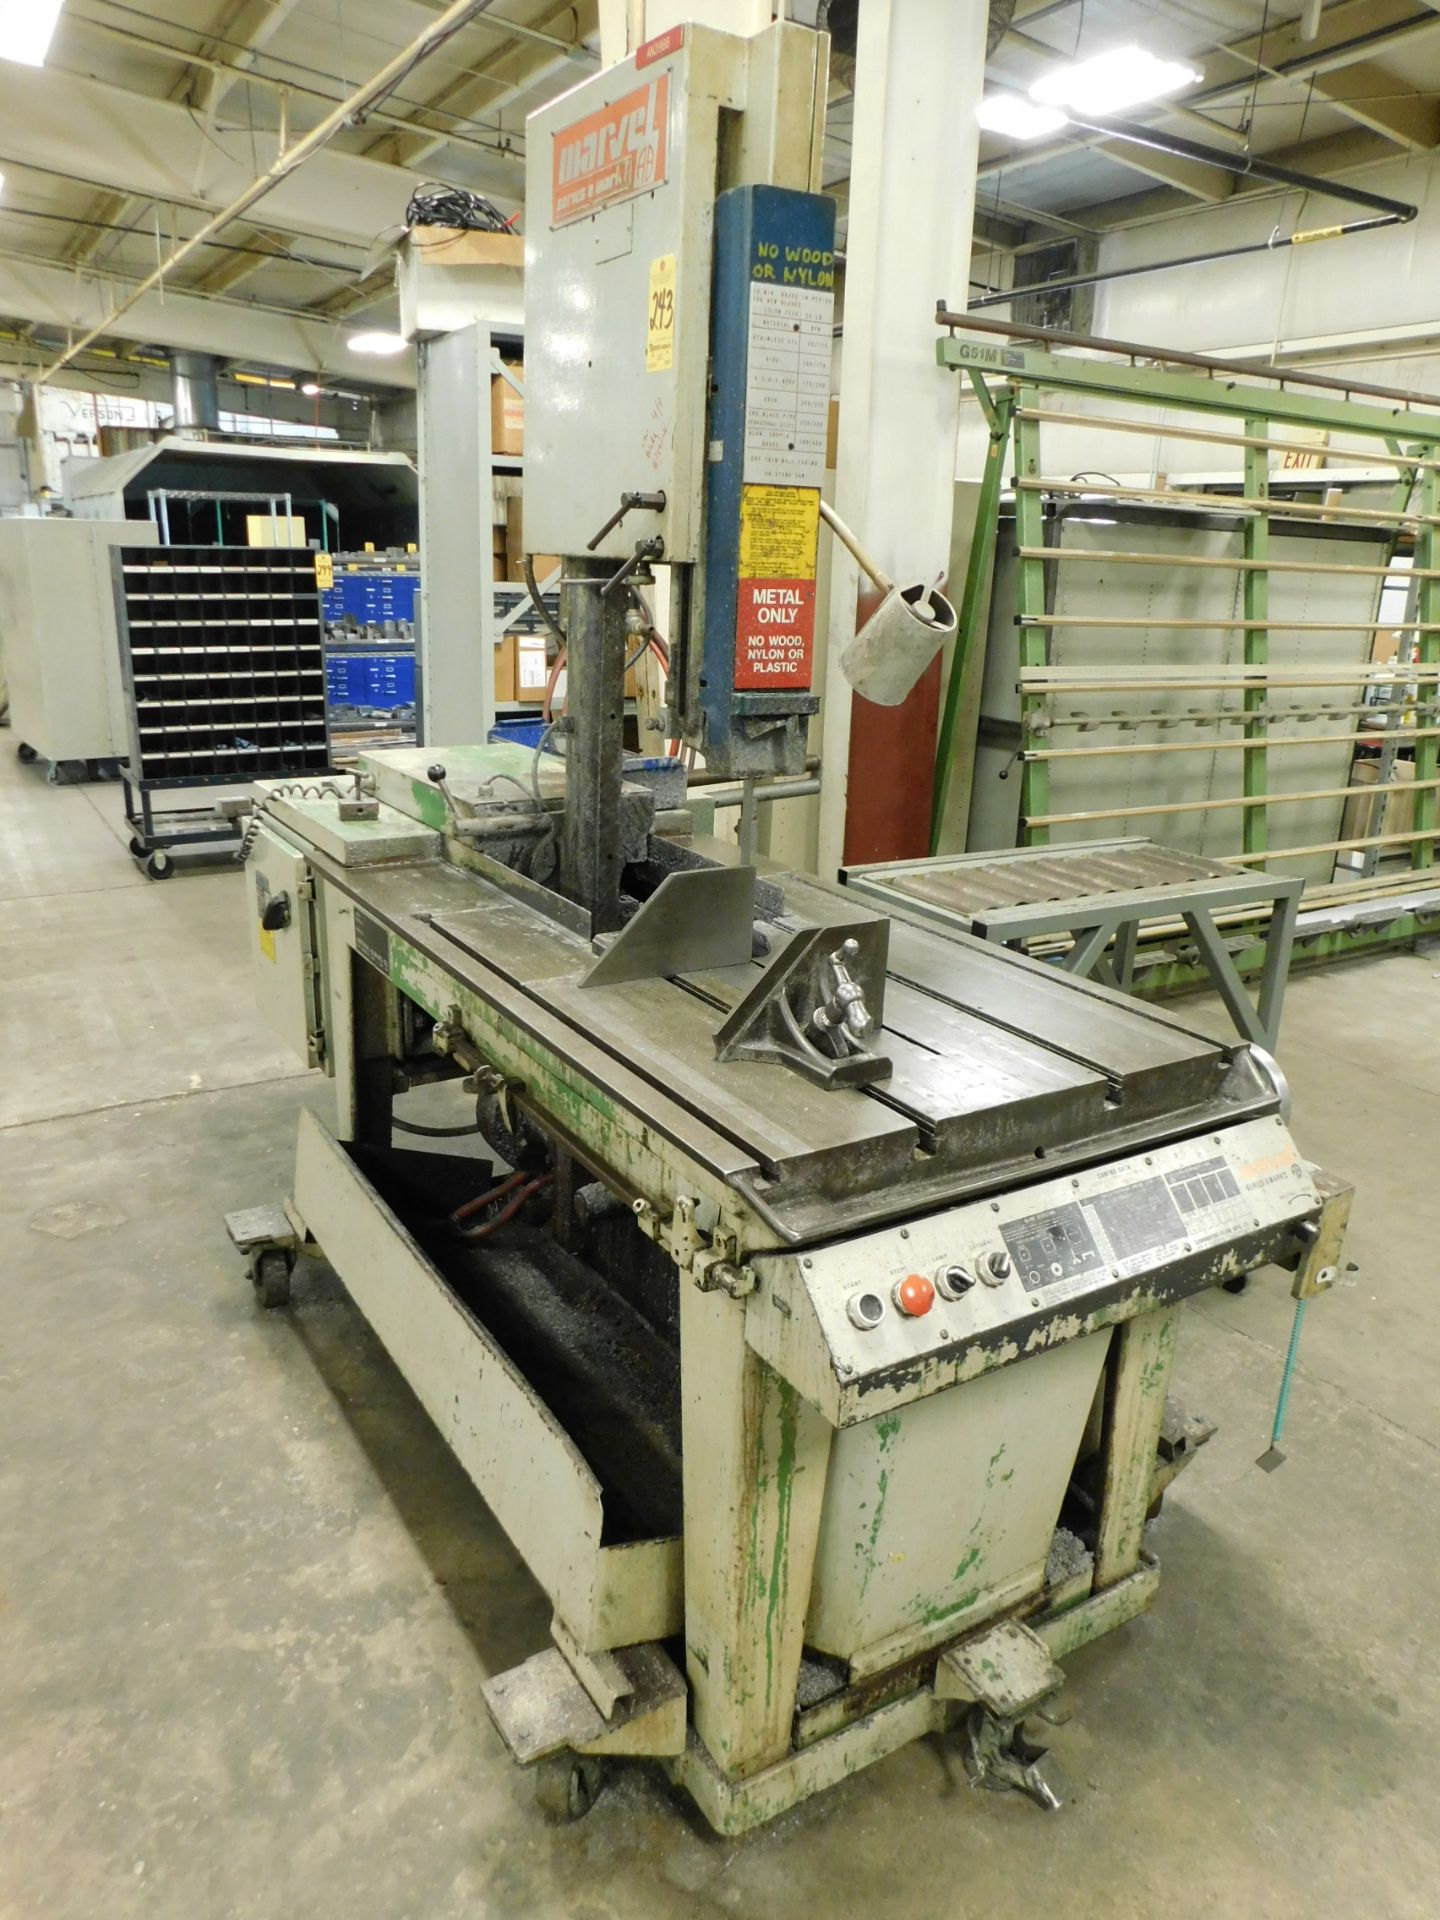 Marvel Series 8, Mark I Vertical Tilting Head Band Saw, s/n 824554-W, Mounted on Base with